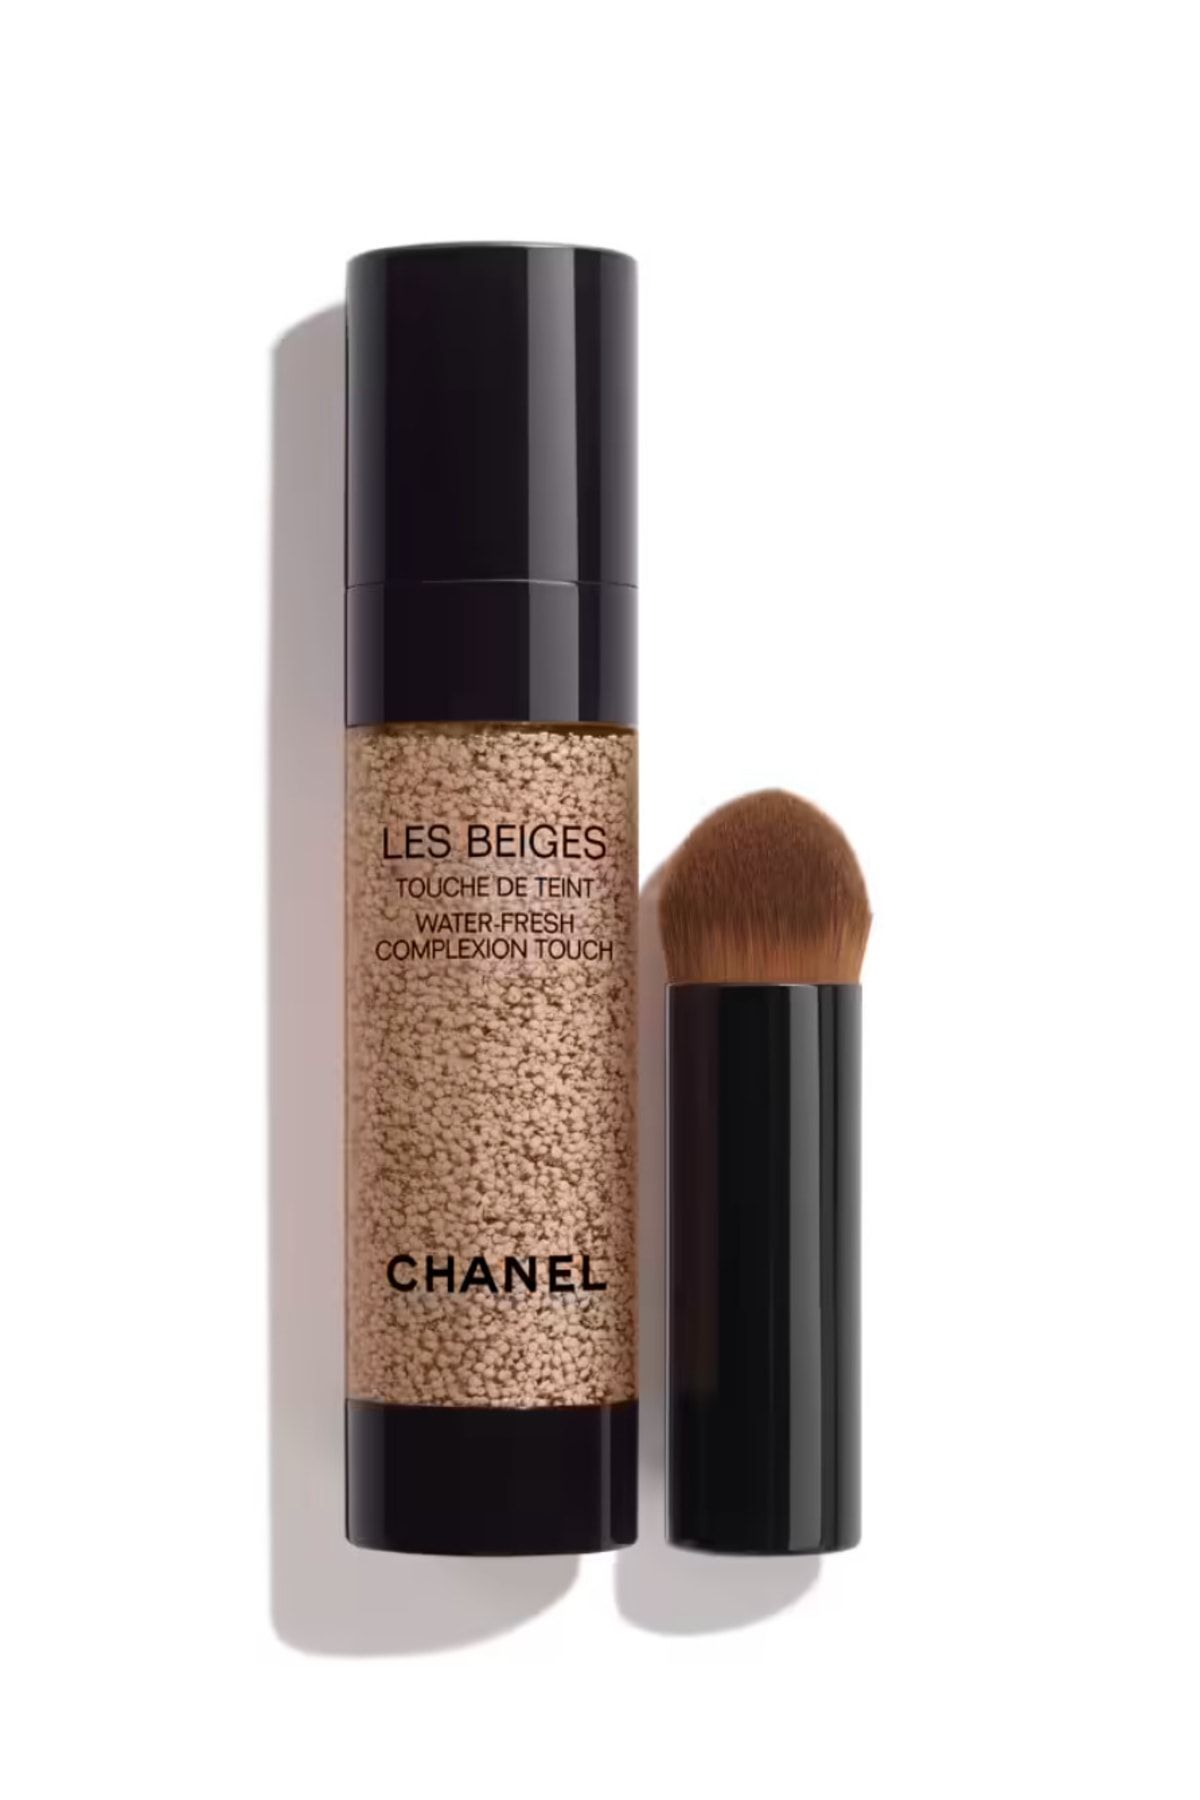 Chanel Les Beiges Water-fresh Complexion Touch